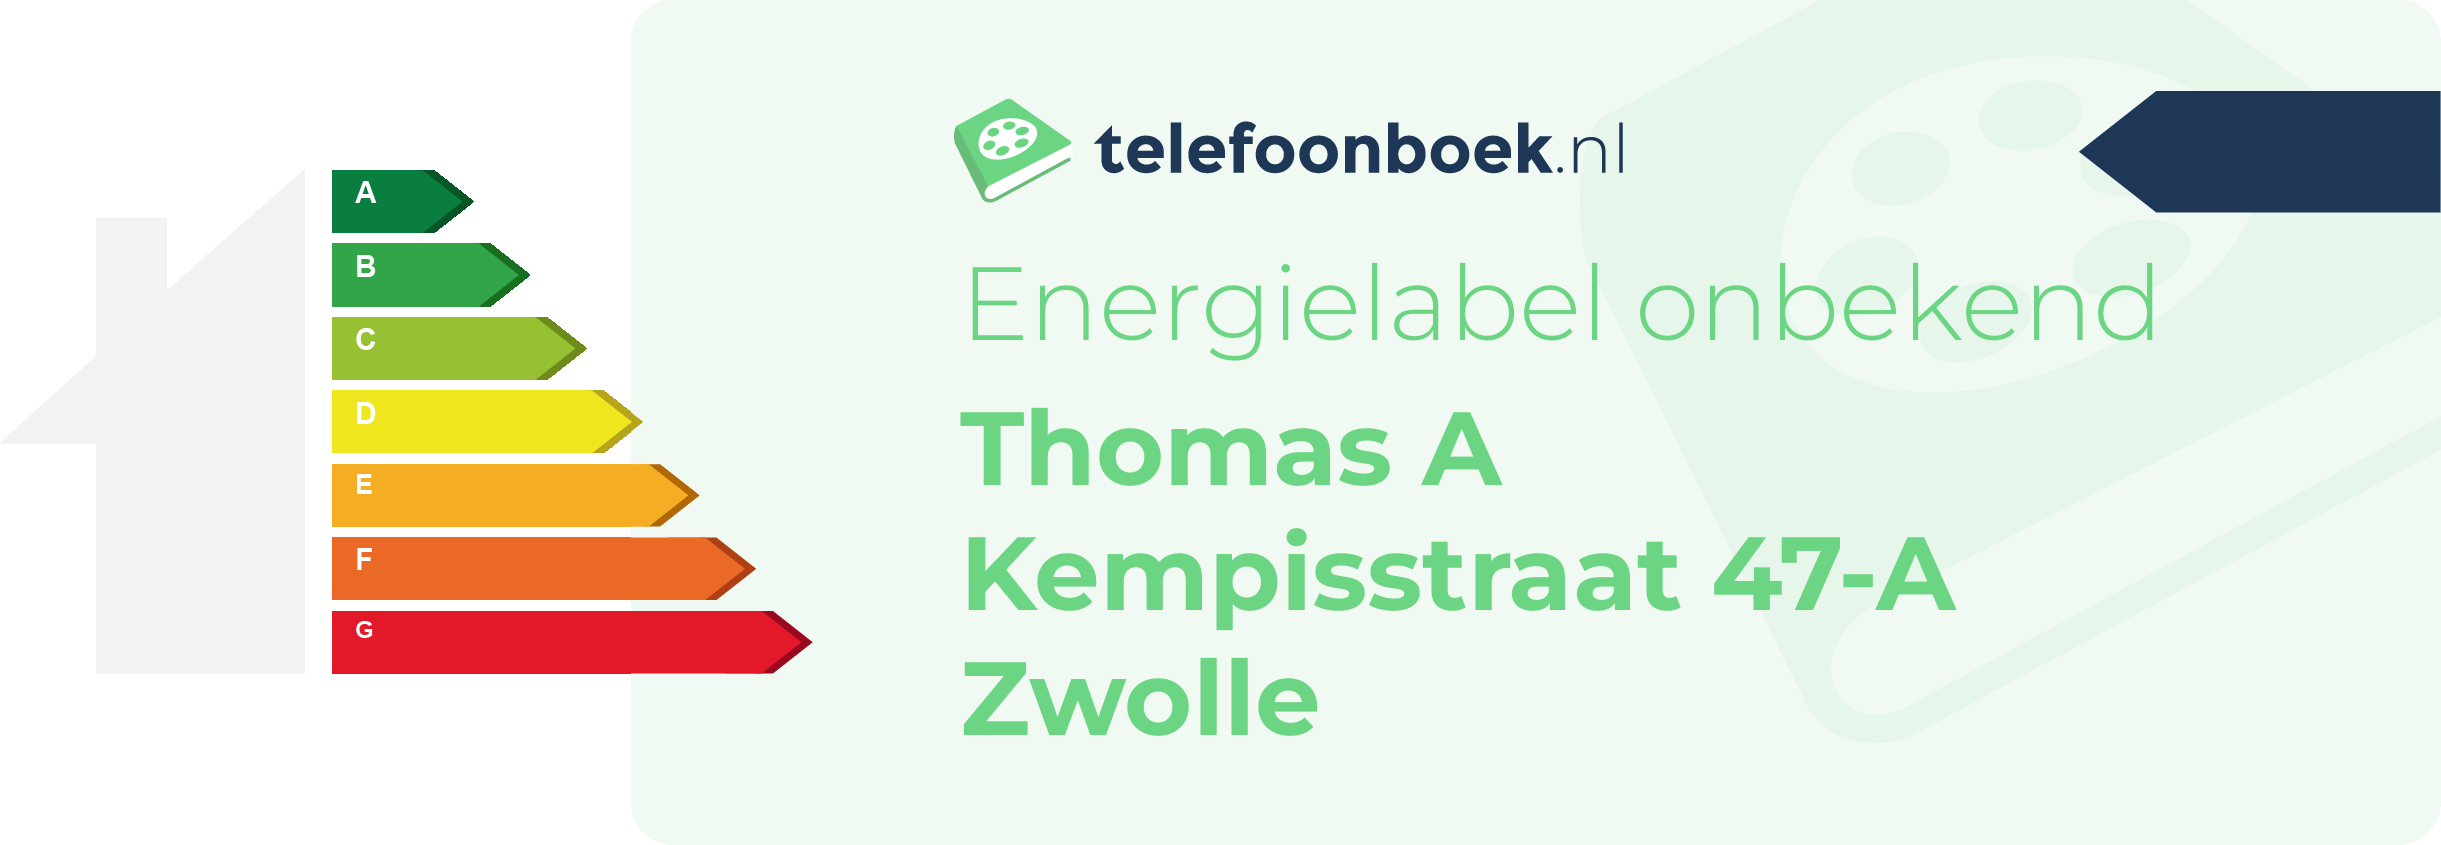 Energielabel Thomas A Kempisstraat 47-A Zwolle